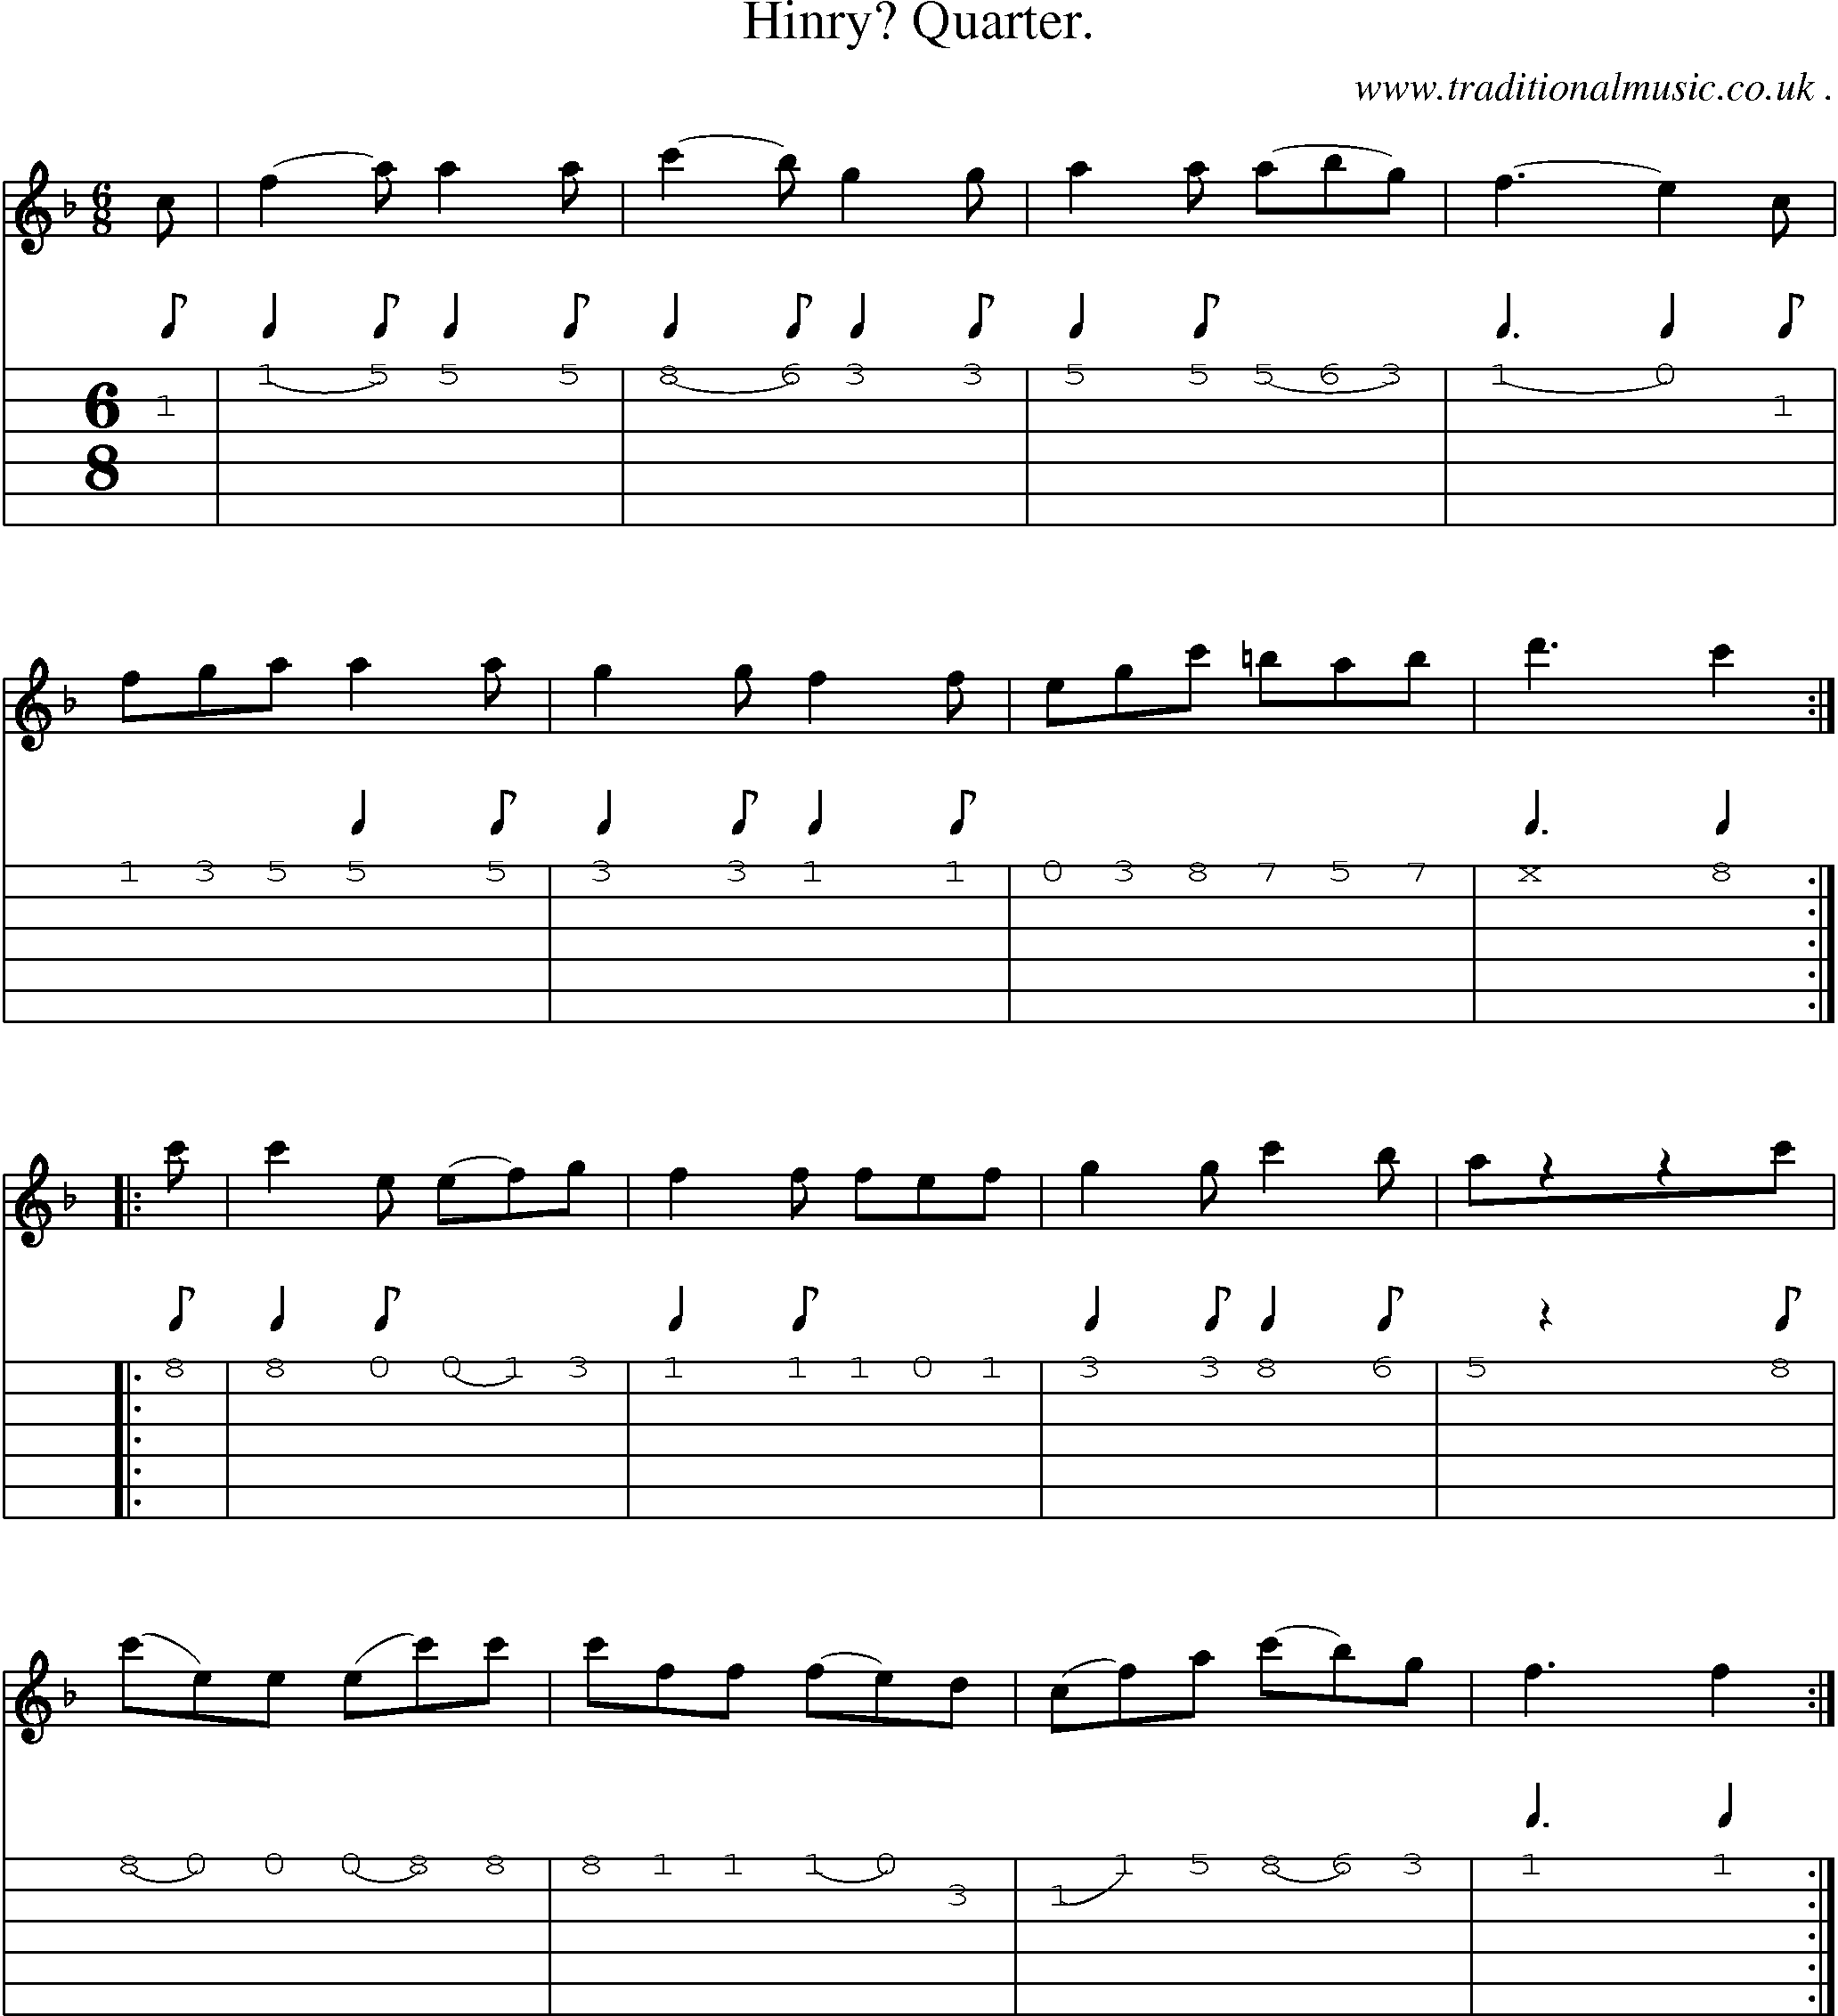 Sheet-Music and Guitar Tabs for Hinry Quarter